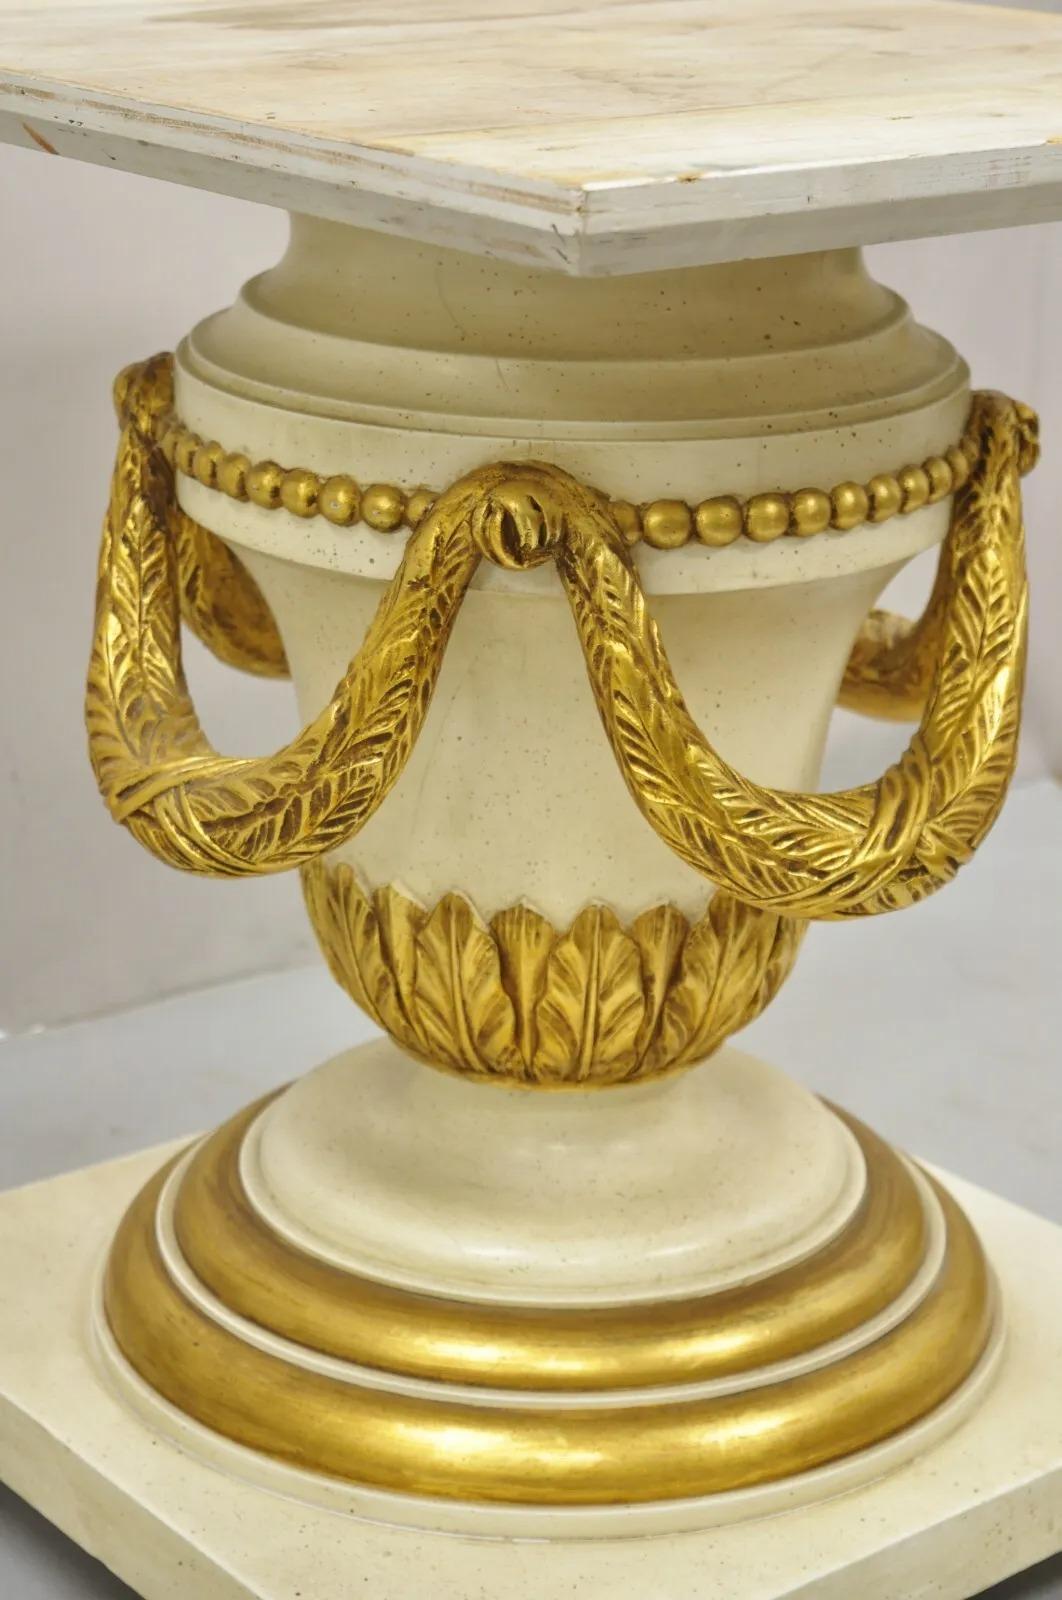 20th Century Italian Regency Cream & Gold Gilt Lacquered Urn Pedestal Dining Table - 3 Leaves For Sale